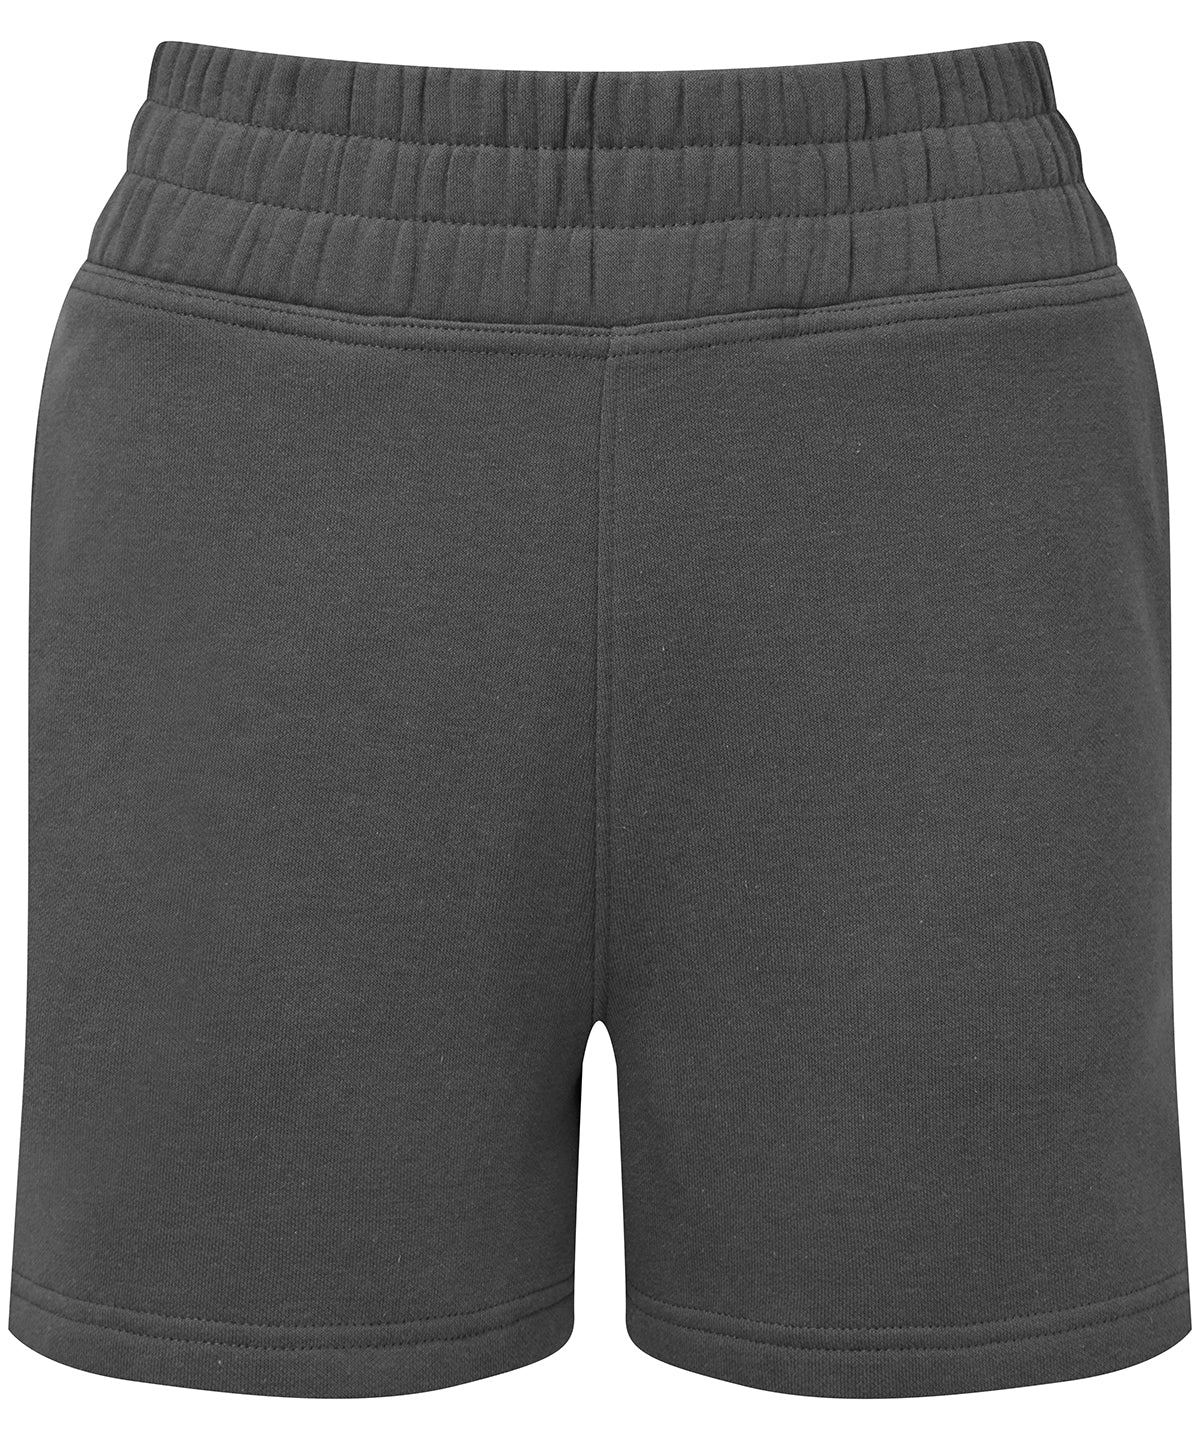 Charcoal - Women's TriDri® jogger shorts Shorts TriDri® Co-ords, Everyday Essentials, Exclusives, Must Haves, New For 2021, New In Autumn Winter, New In Mid Year, Street Casual, Streetwear, Tracksuits, Trousers & Shorts, Women's Fashion, Working From Home Schoolwear Centres